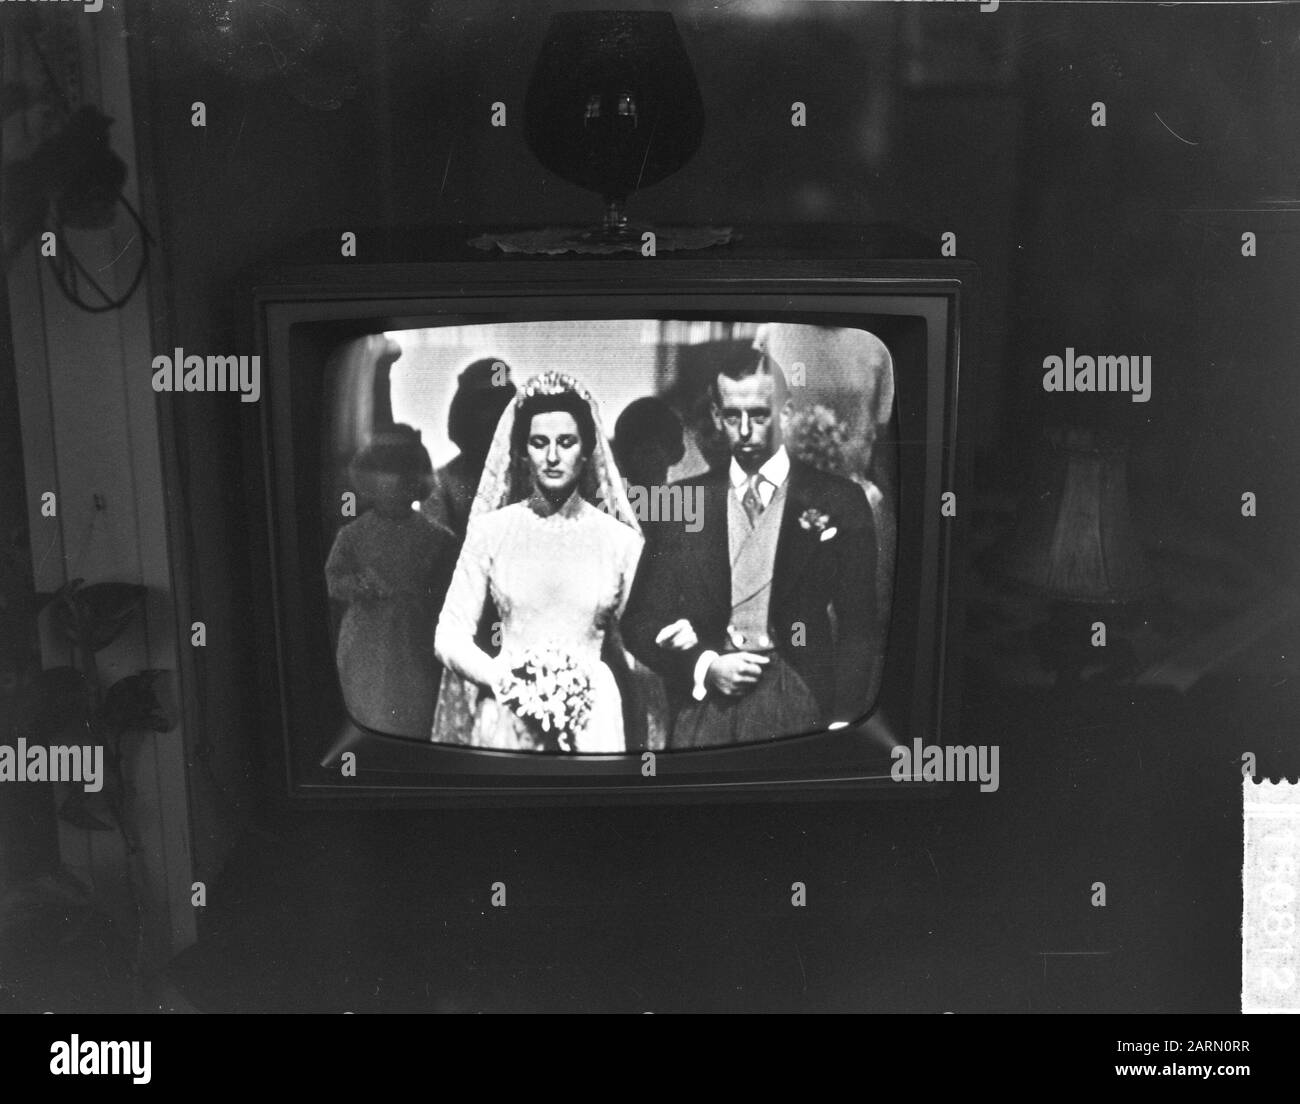 Marriage Alexandra of Kent with Angus Ogilvy in Westminster Abbey in London [photo from TV]. Princess Alexandra and her brother Prince Edward, the Duke of Kent Date: 24 April 1963 Location: Great Britain, London Keywords: nobility, marriages Personal name: Alexandra princess, Edward prince Stock Photo